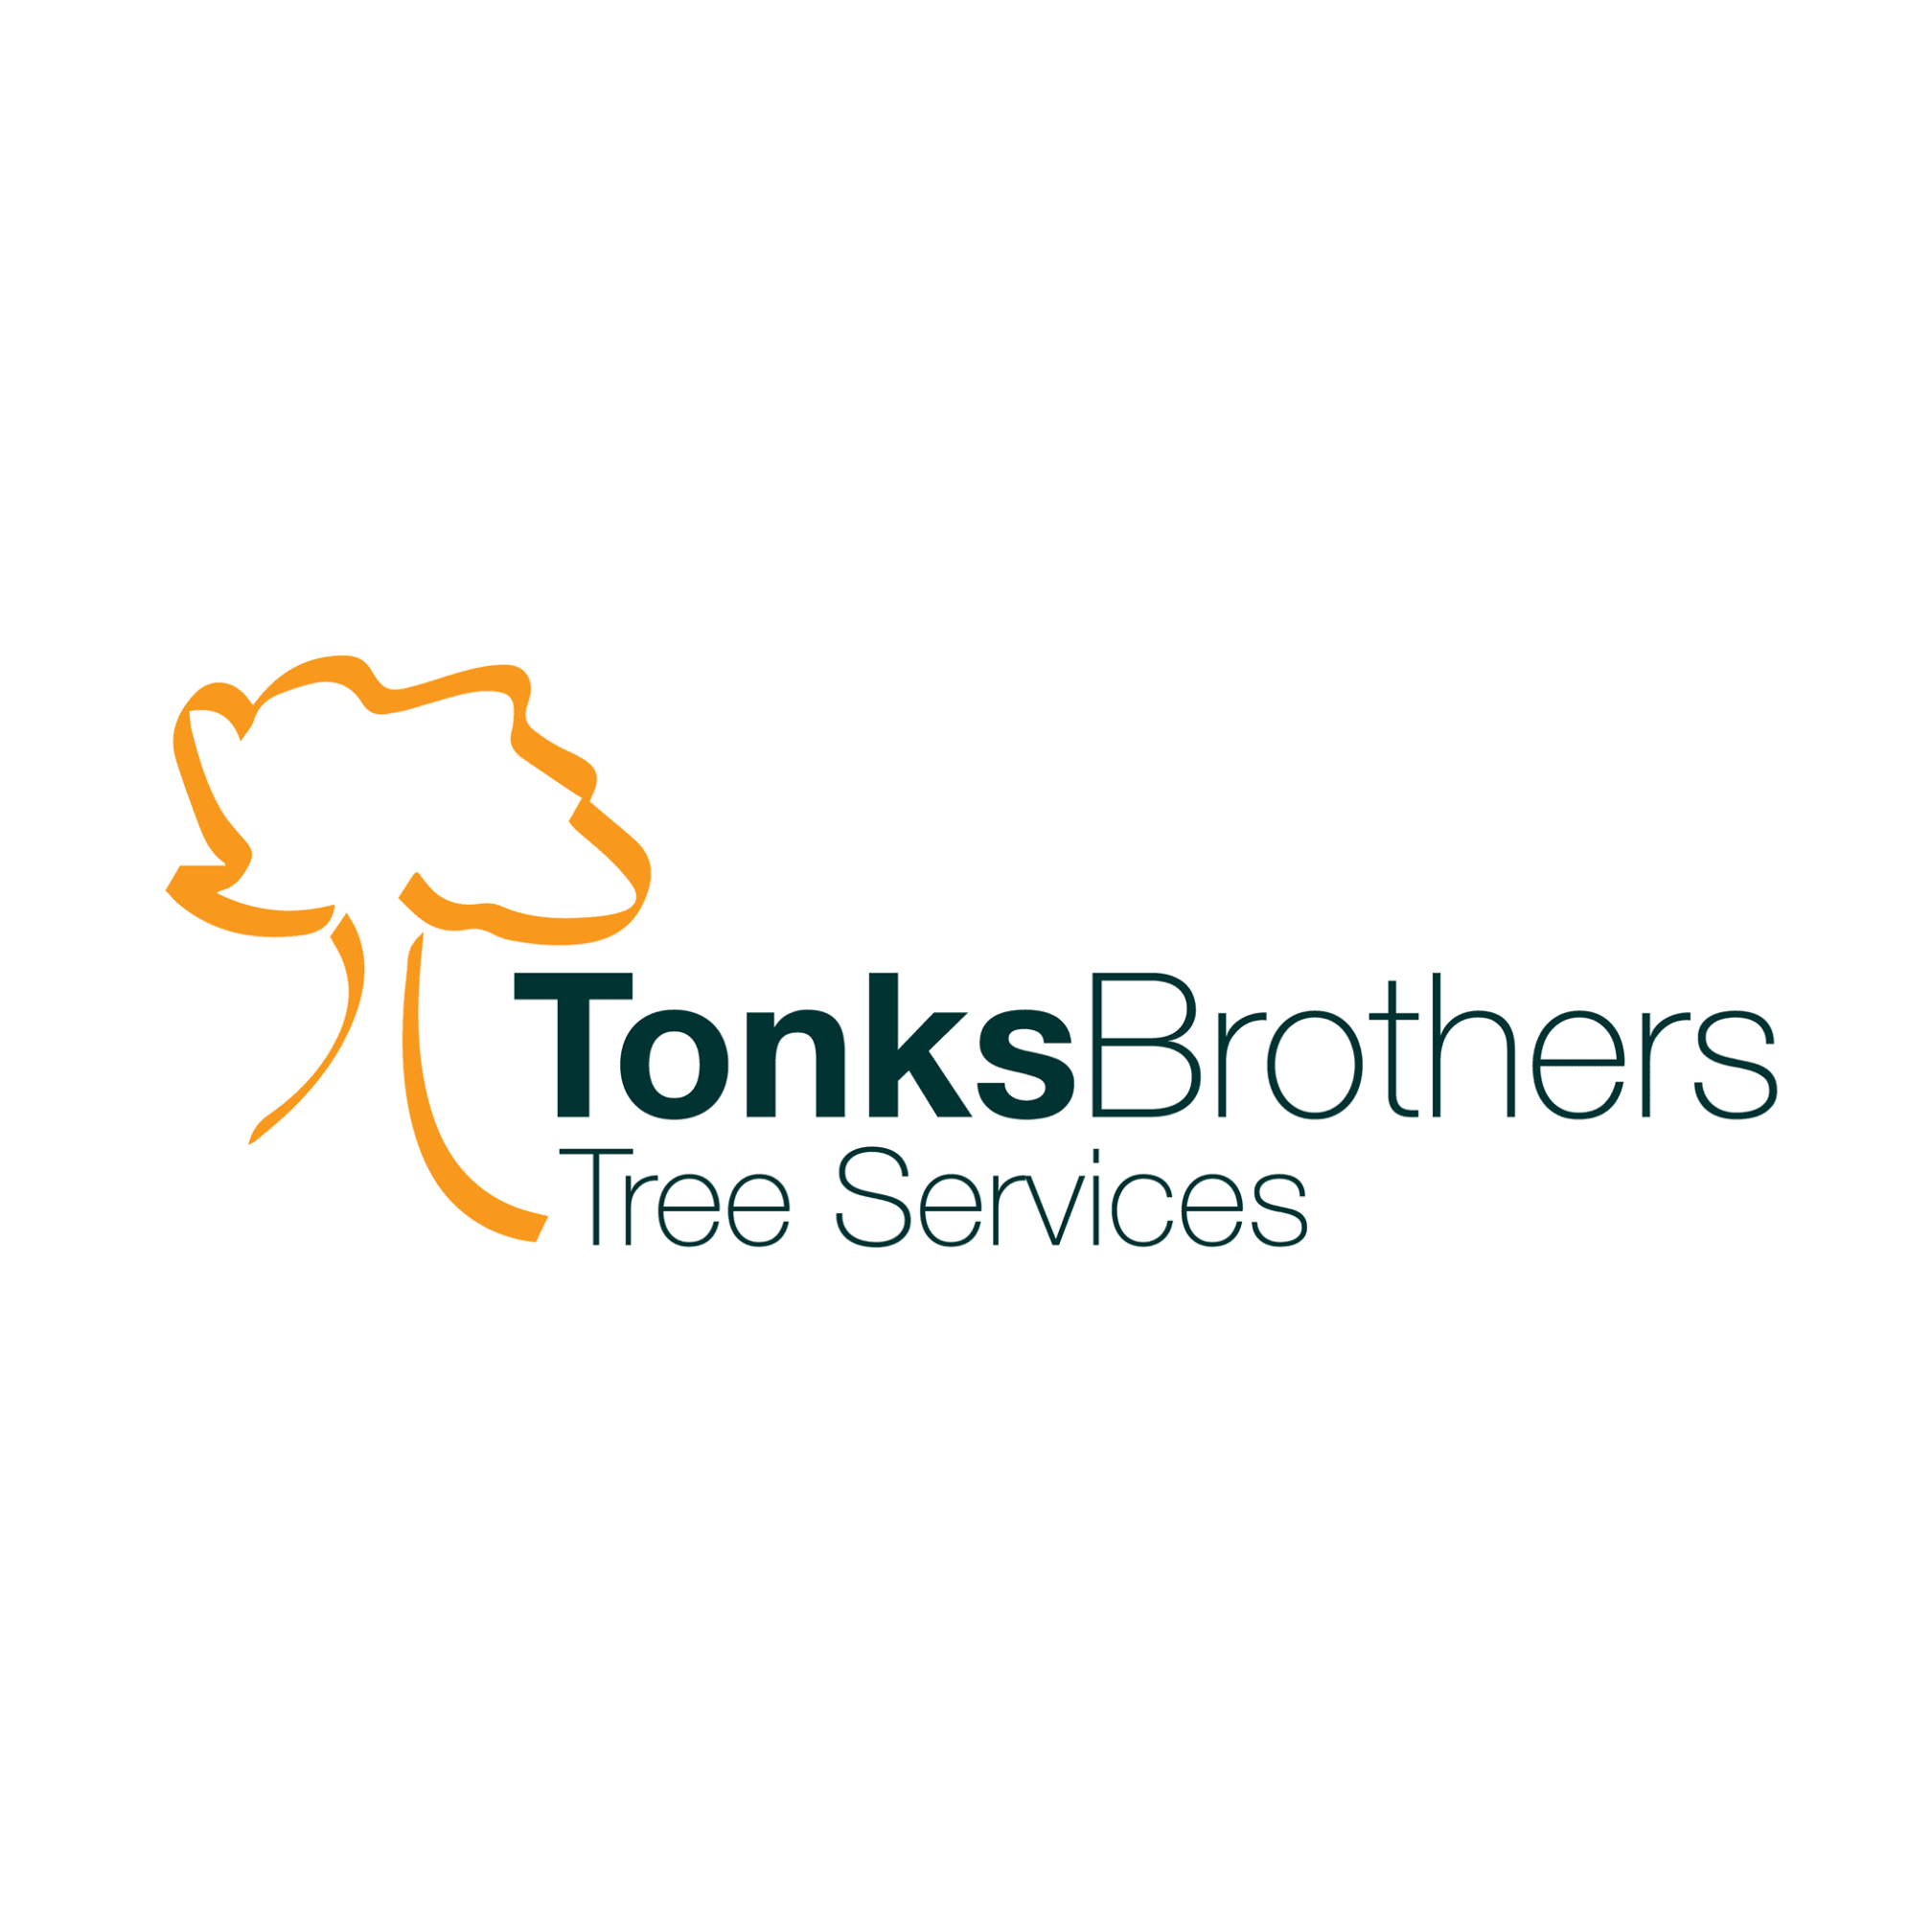 LOGO Tonks Brothers Tree Services Burntwood 01543 675912